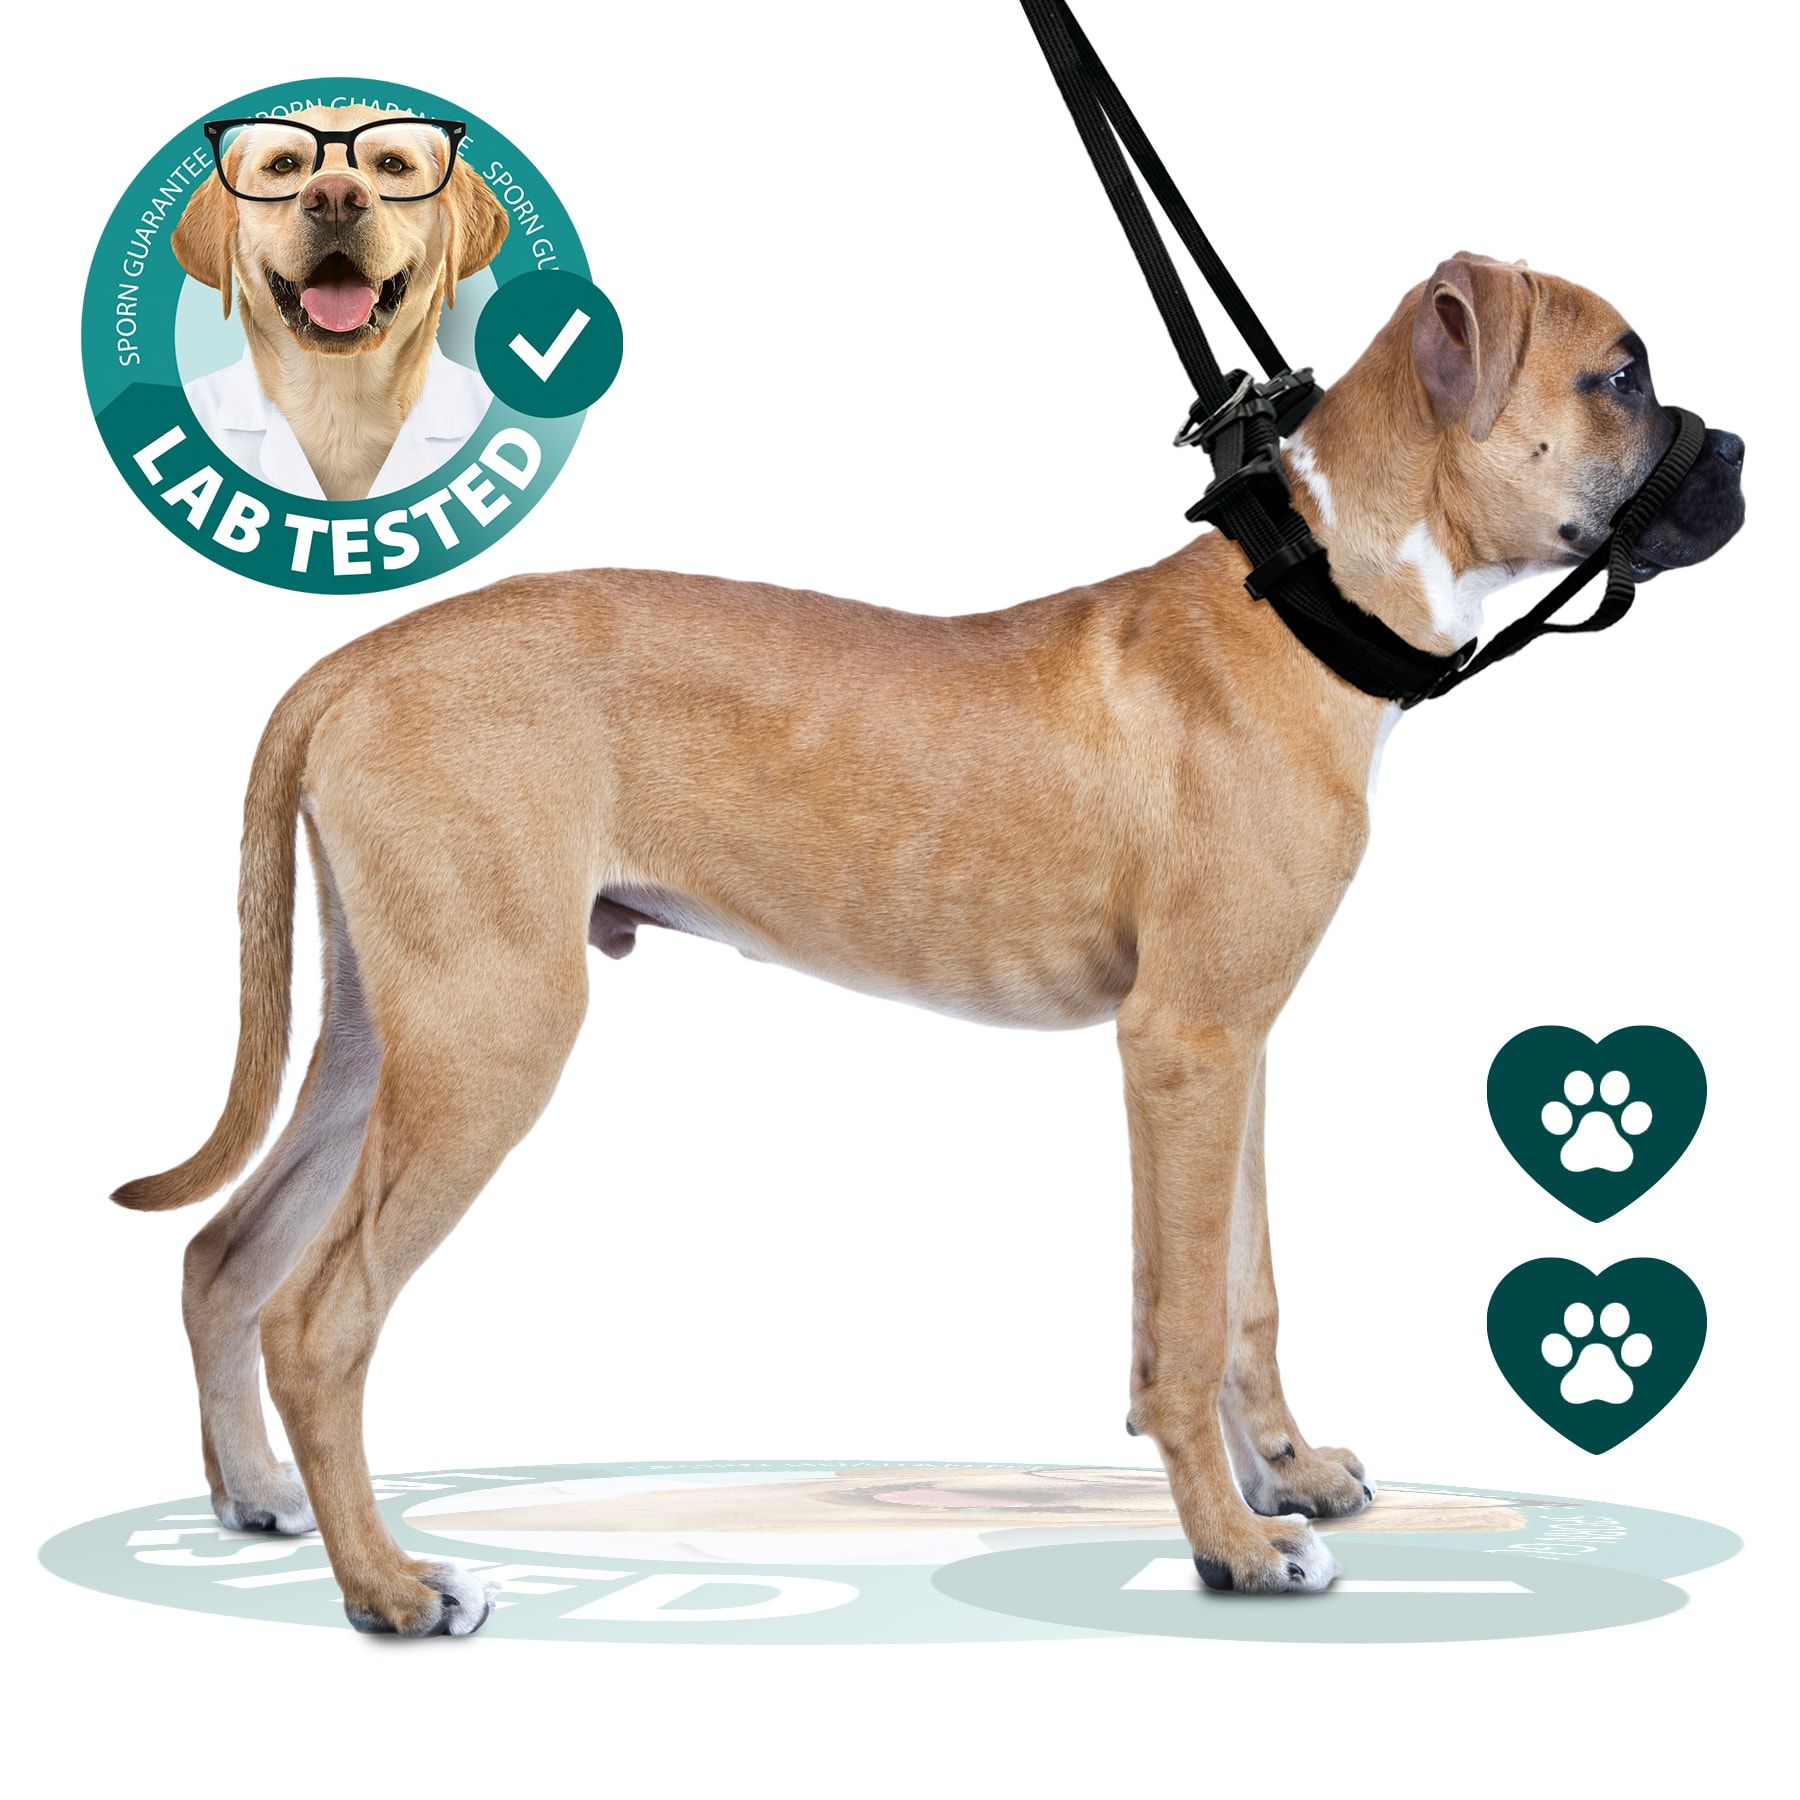 We Tested 12 No-Pull Dog Harnesses To See Which Ones Work